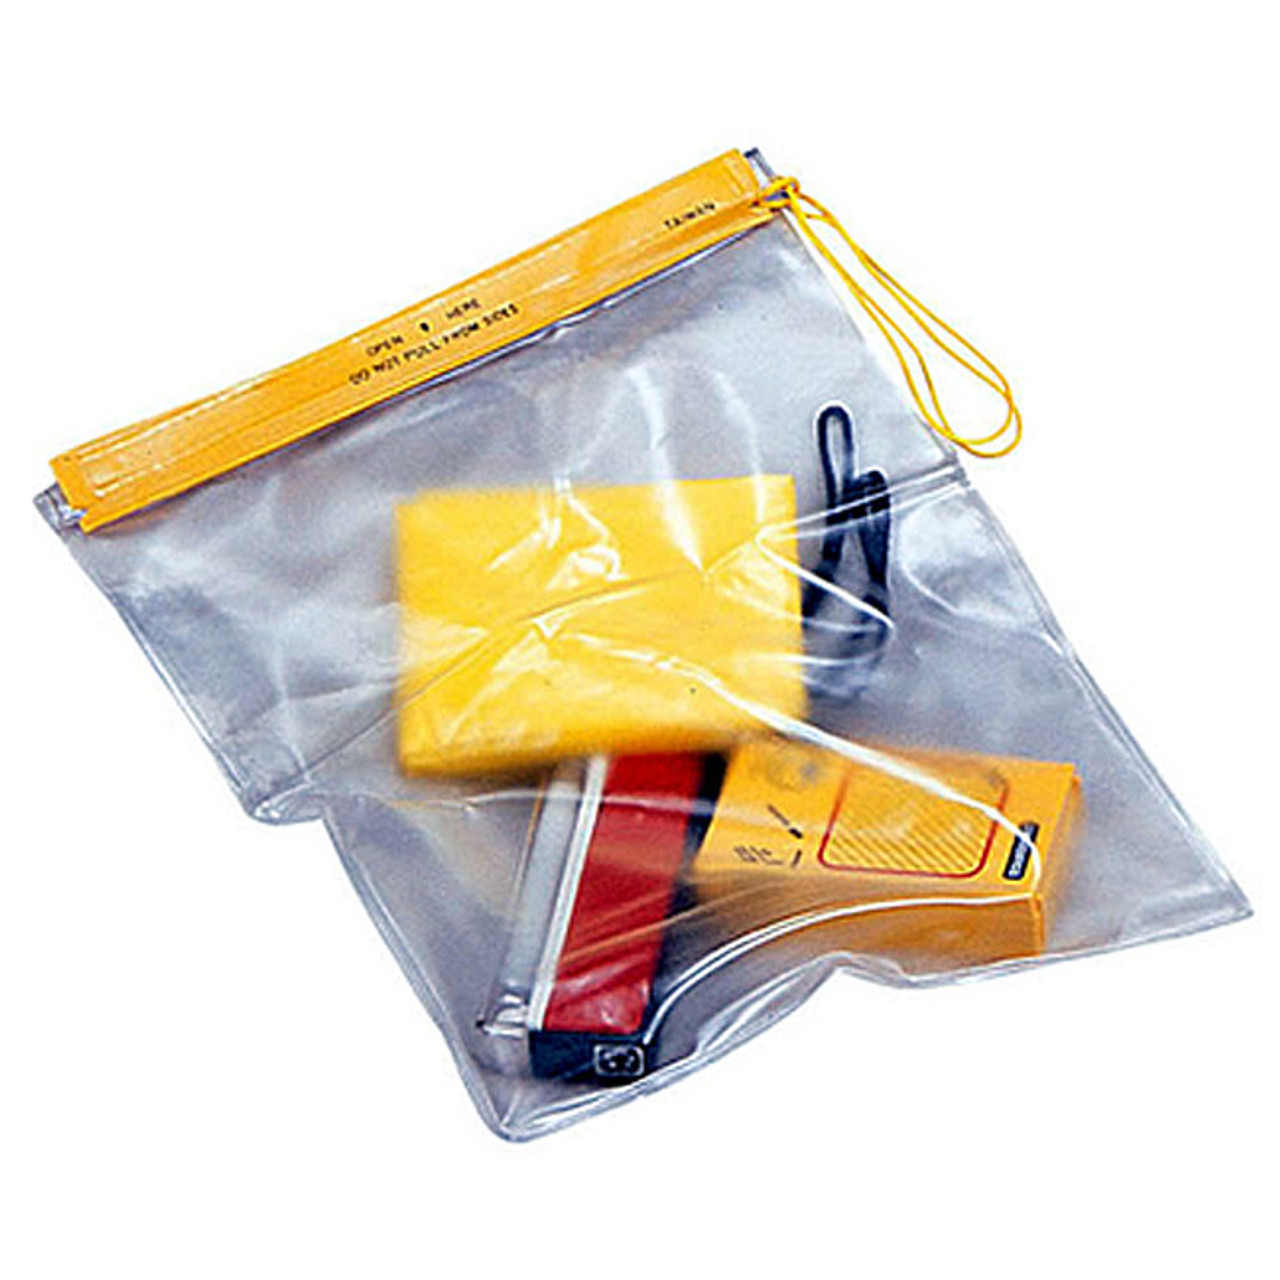 Plastic Case 5'' x 8'' x 3'' w/ Handle Gasket - EMT Bags, Backpacks and  First Aid Kit Containers